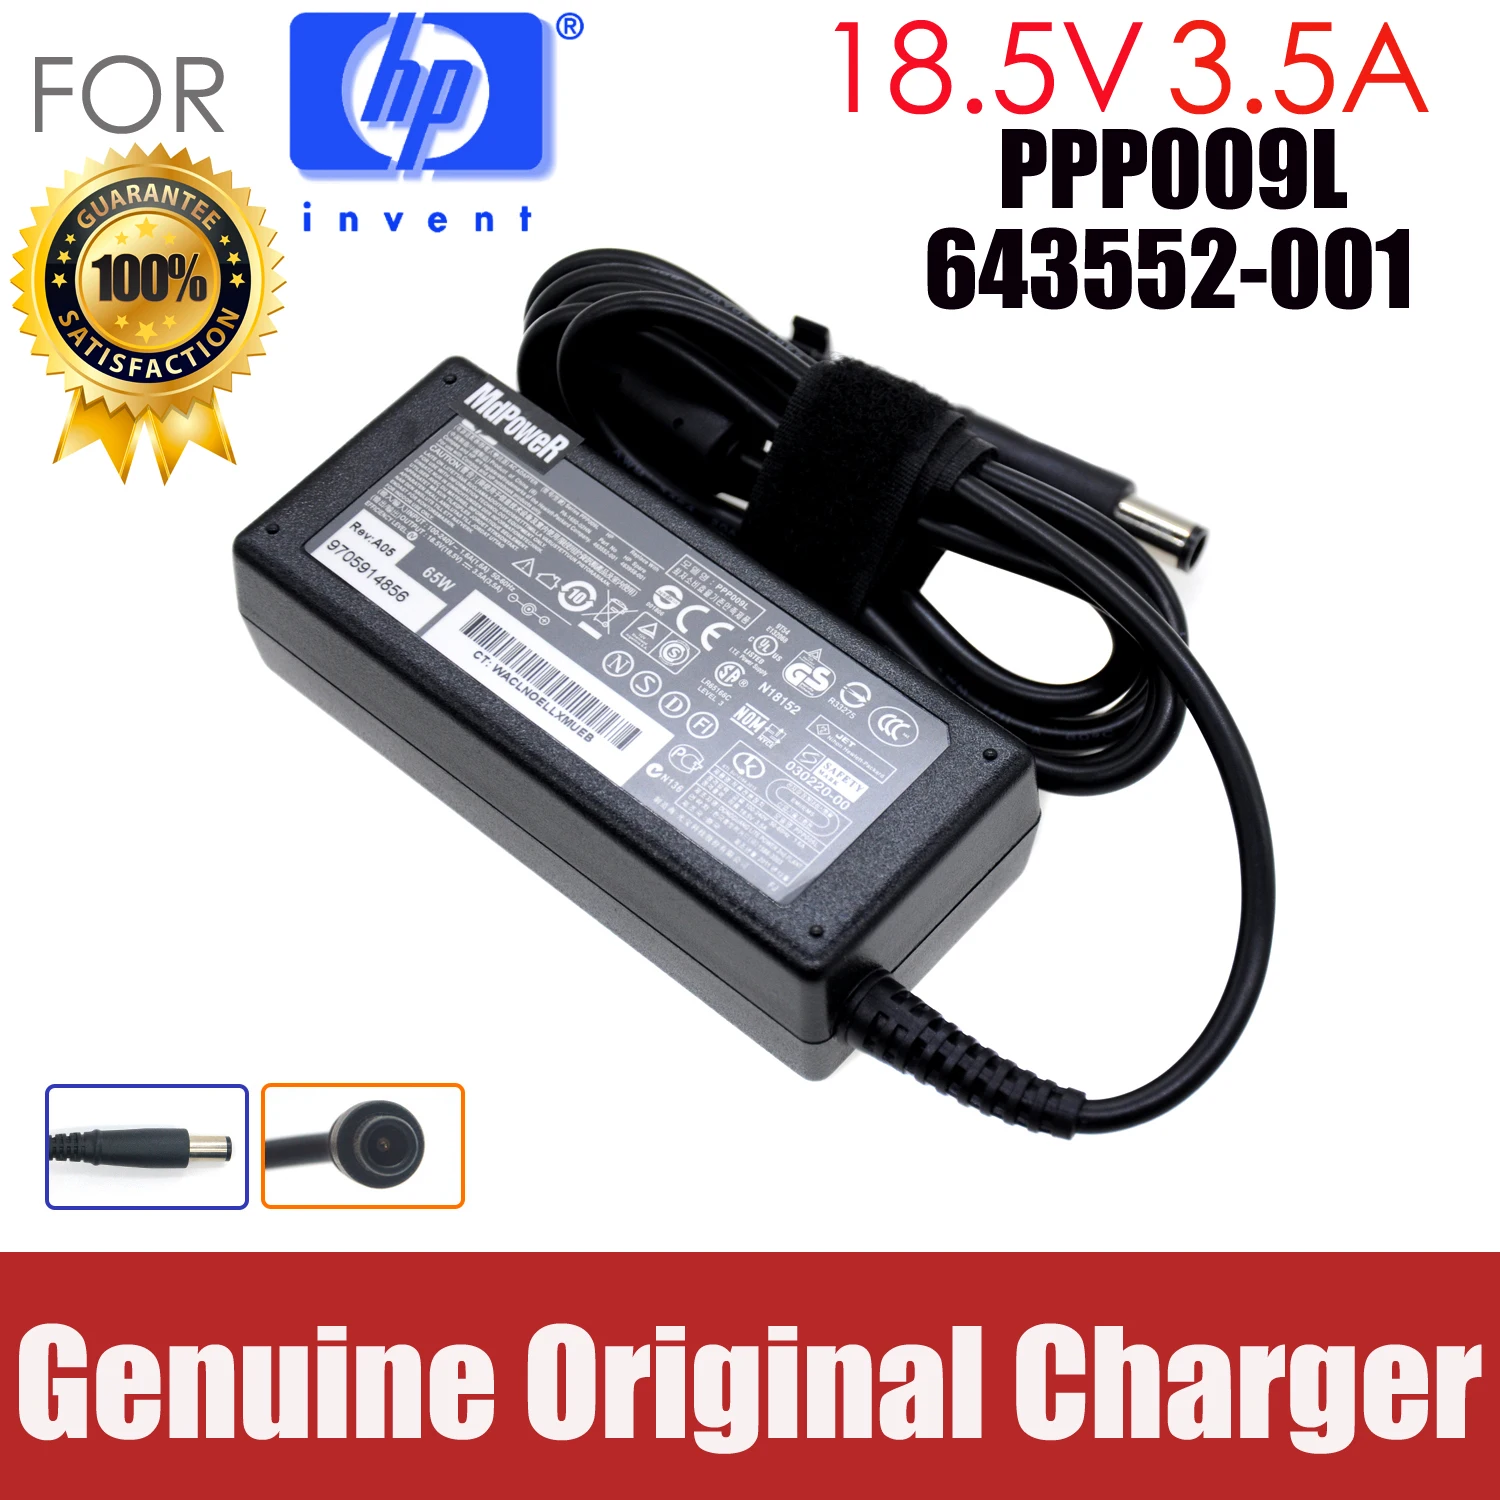 

Original 18.5V 3.5A AC adapter laptop charger For HP 2133 2710 2210B 2230S 2510p 2530p 2540p 2560p 2570p 2710p 2730p 2740p